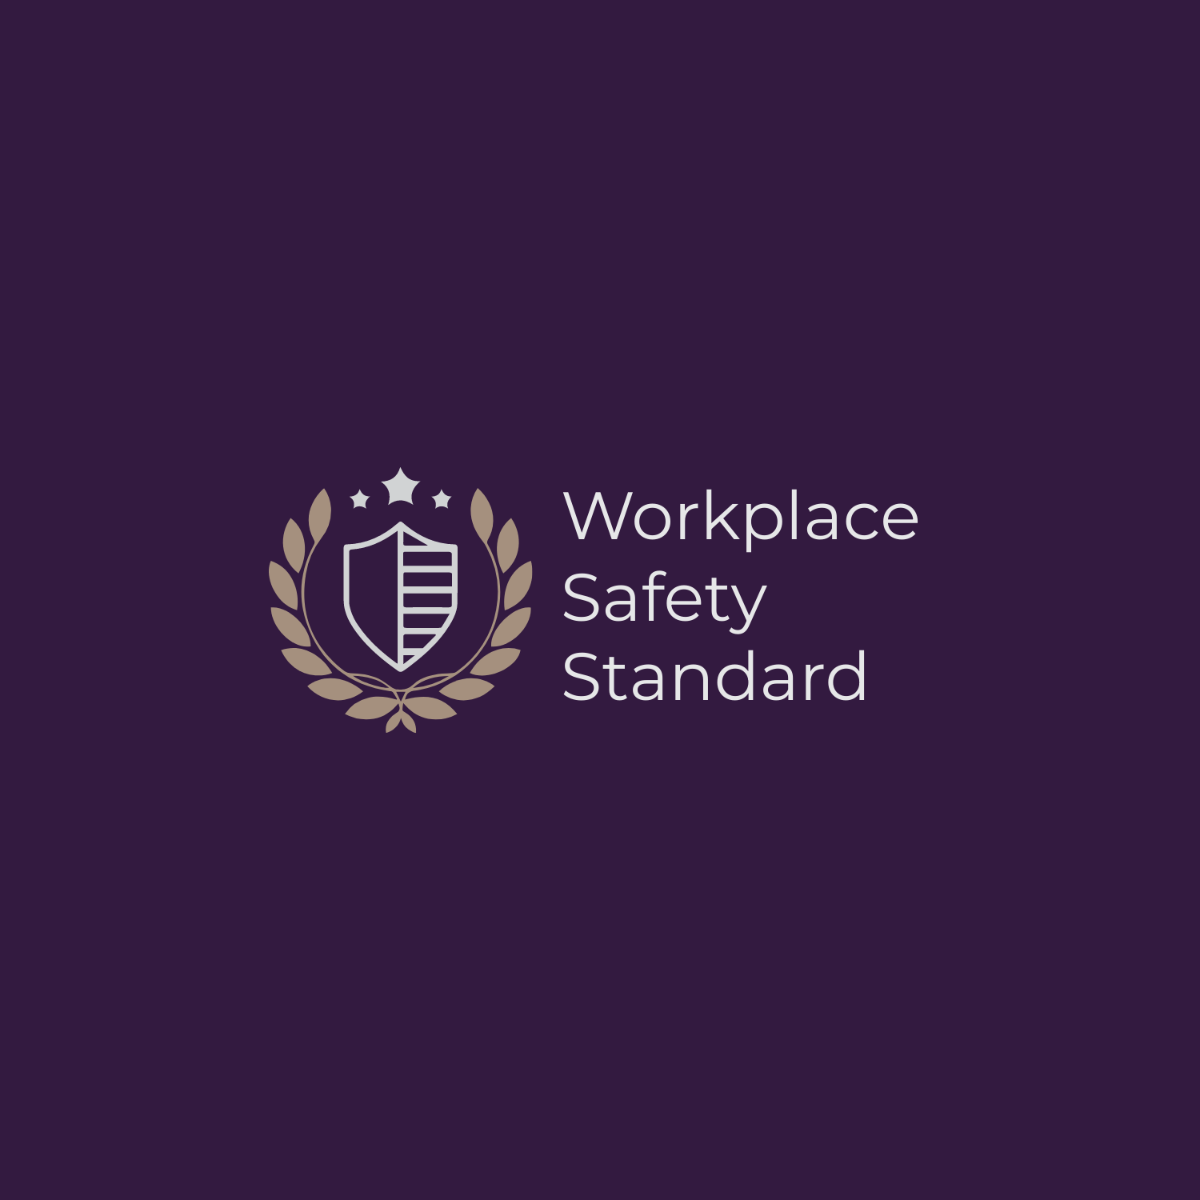 Workplace Safety Standard Logo Template